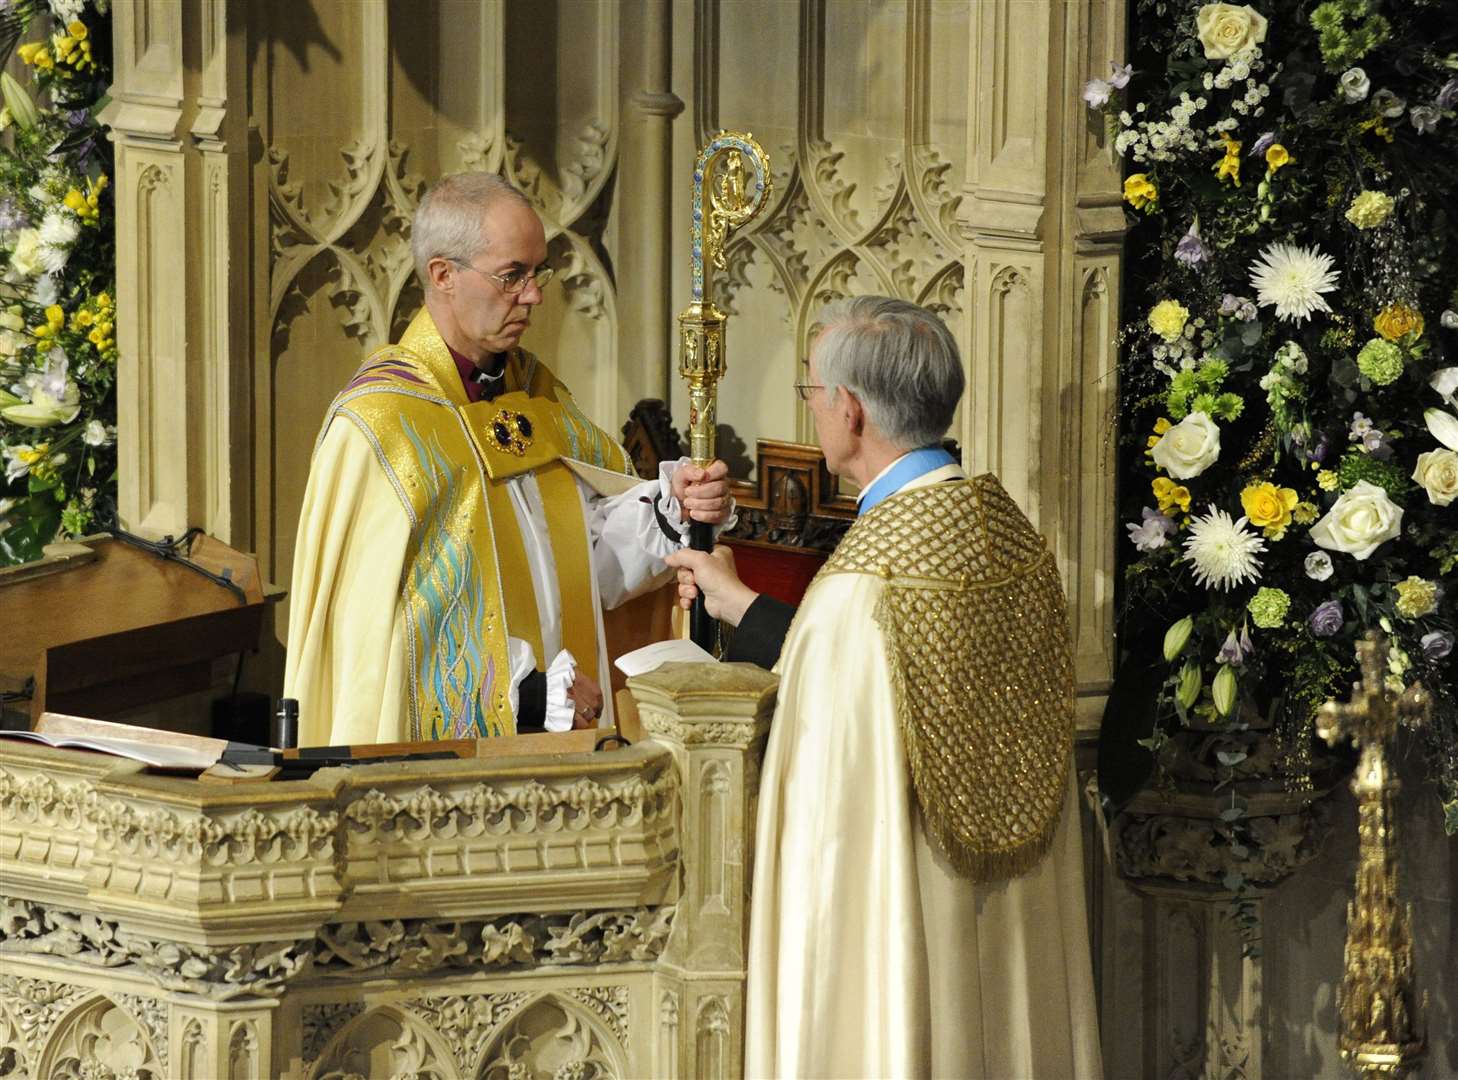 Justin Welby is enthroned as Archbishop of Canterbury by the Dean of Canterbury, The Very Reverend Robert Willis, in 2013. Picture: Andy Payton